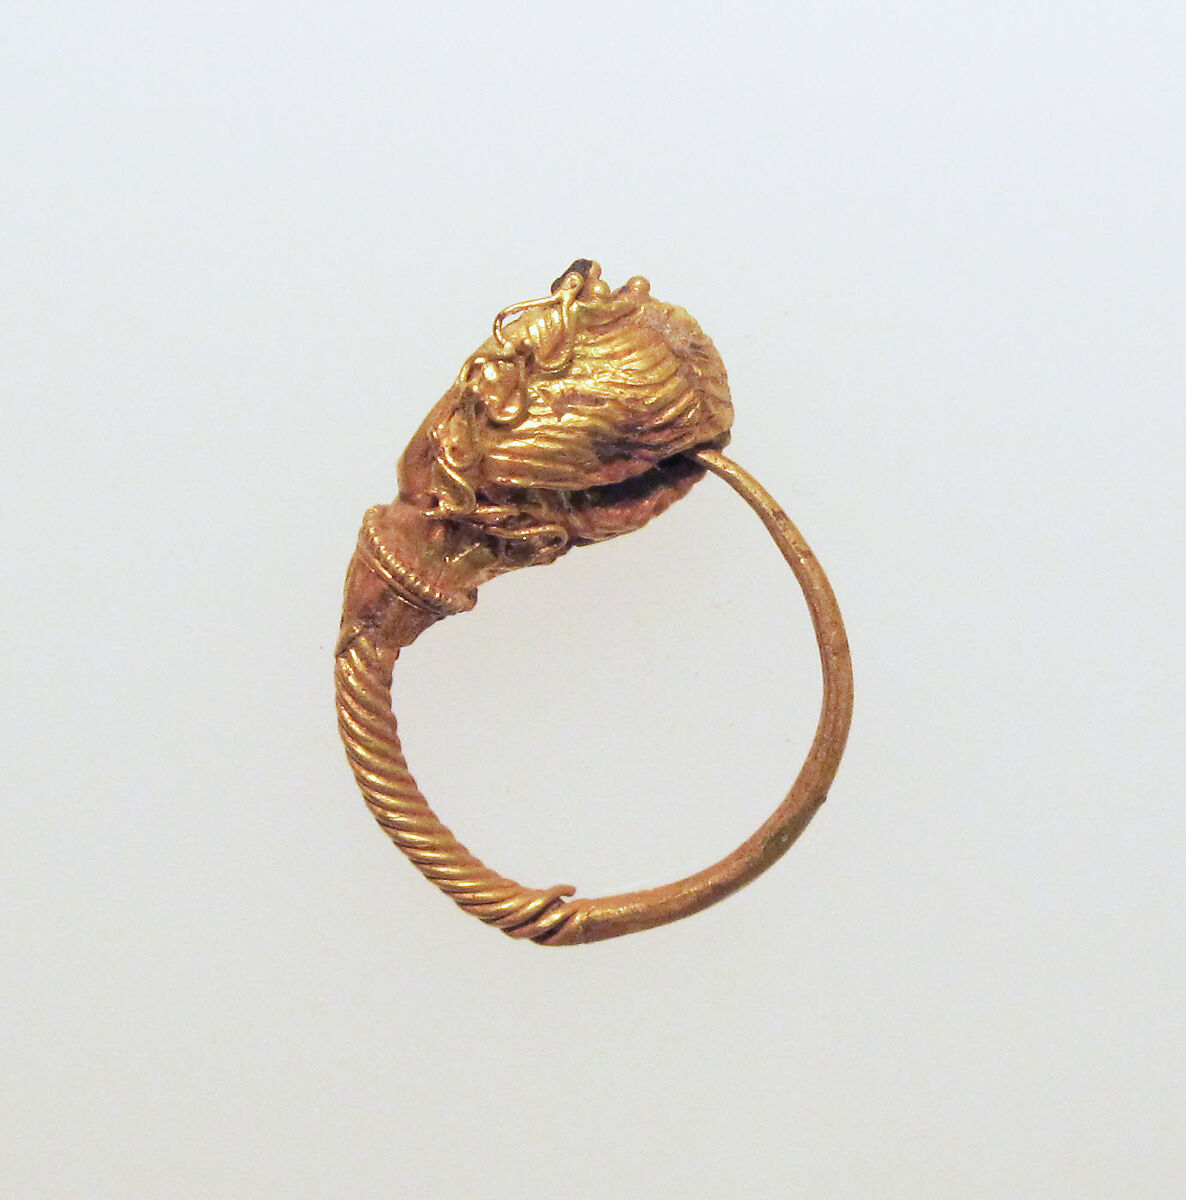 Gold earring with woman's head, Gold, Greek 